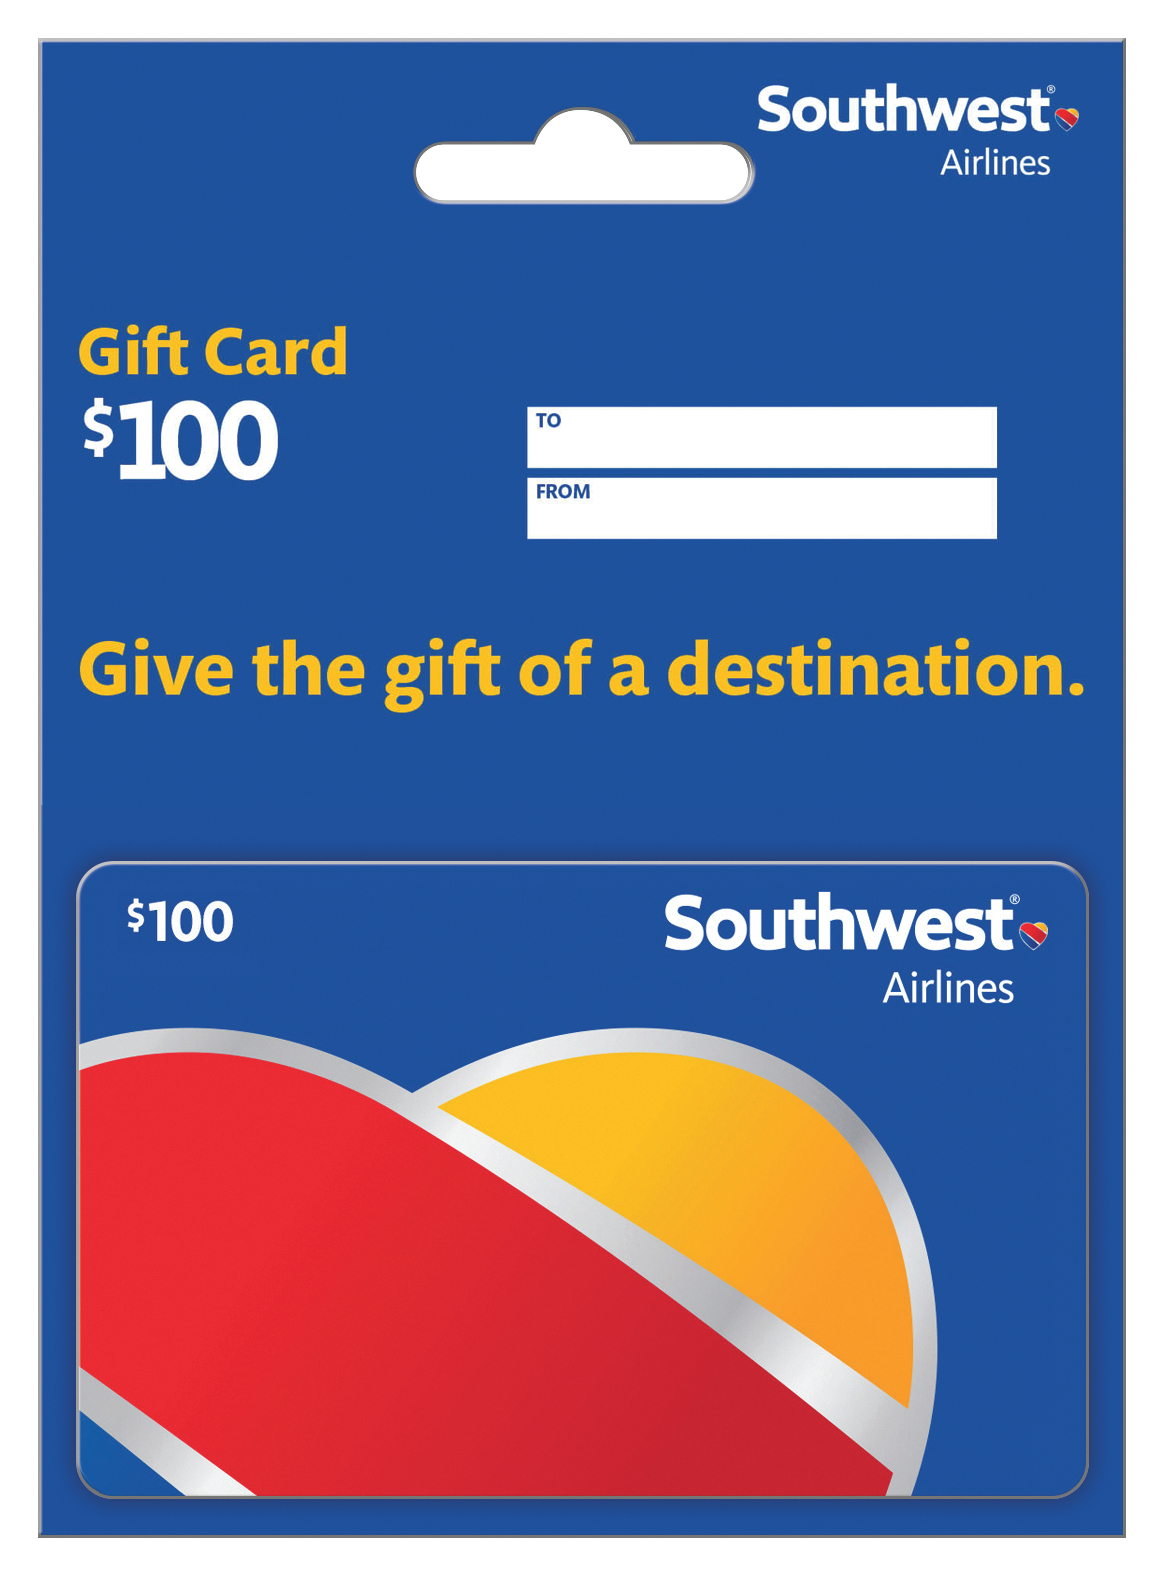 Southwest Airlines Gift Card $100 - image 1 of 3